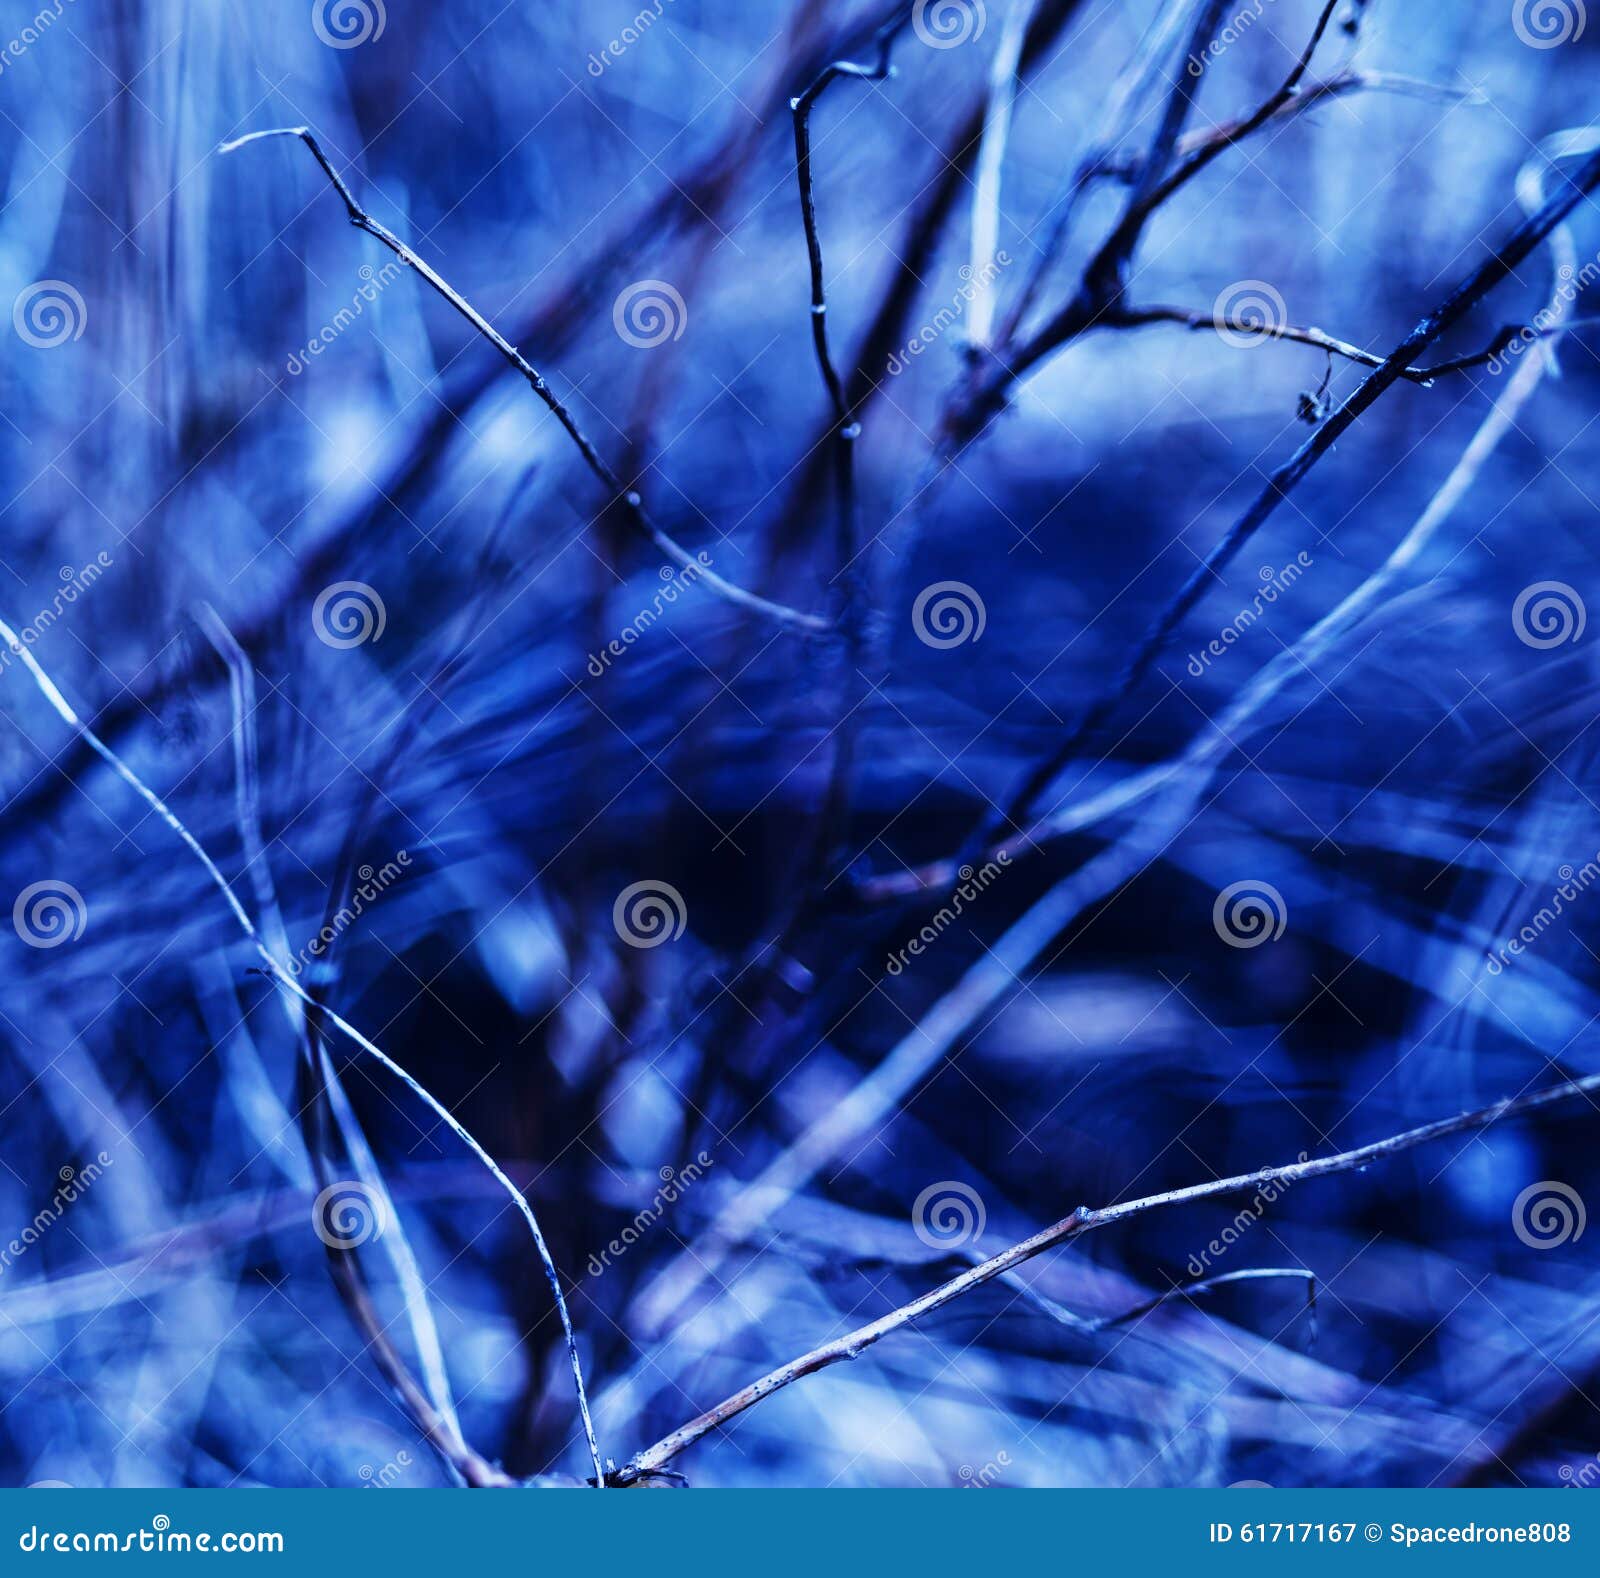 Square Vivid Blueish Branches Abstraction Stock Image - Image of